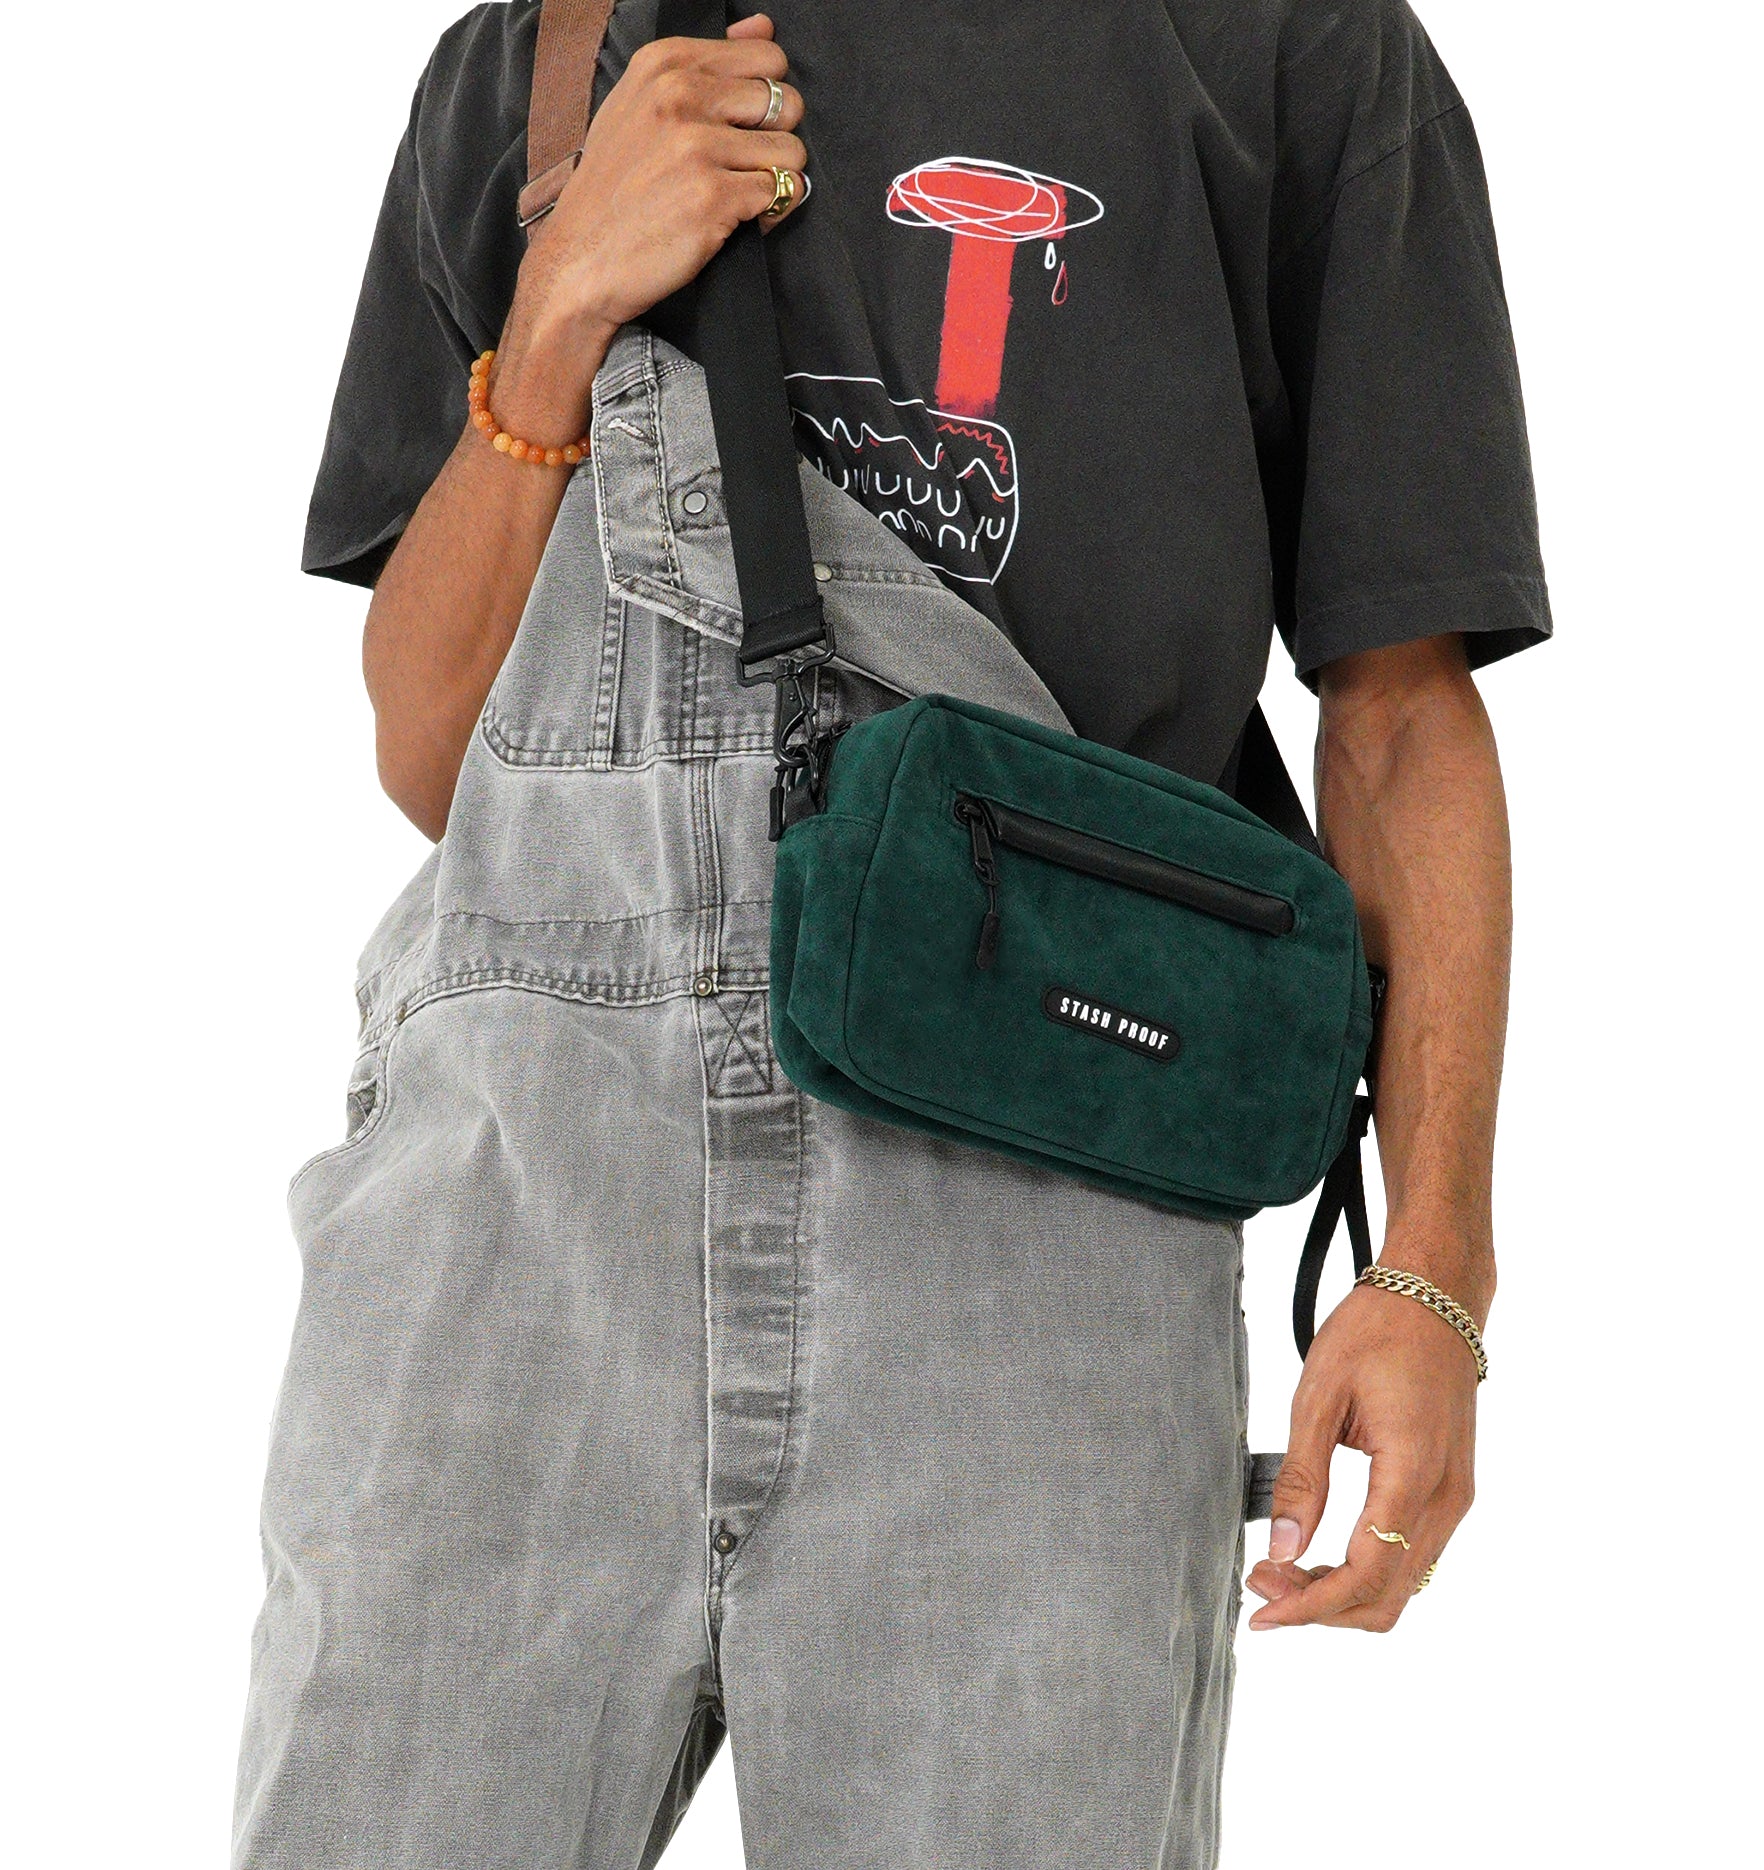 Male model from shoulder down in gray overalls carrying dark green Rover bag